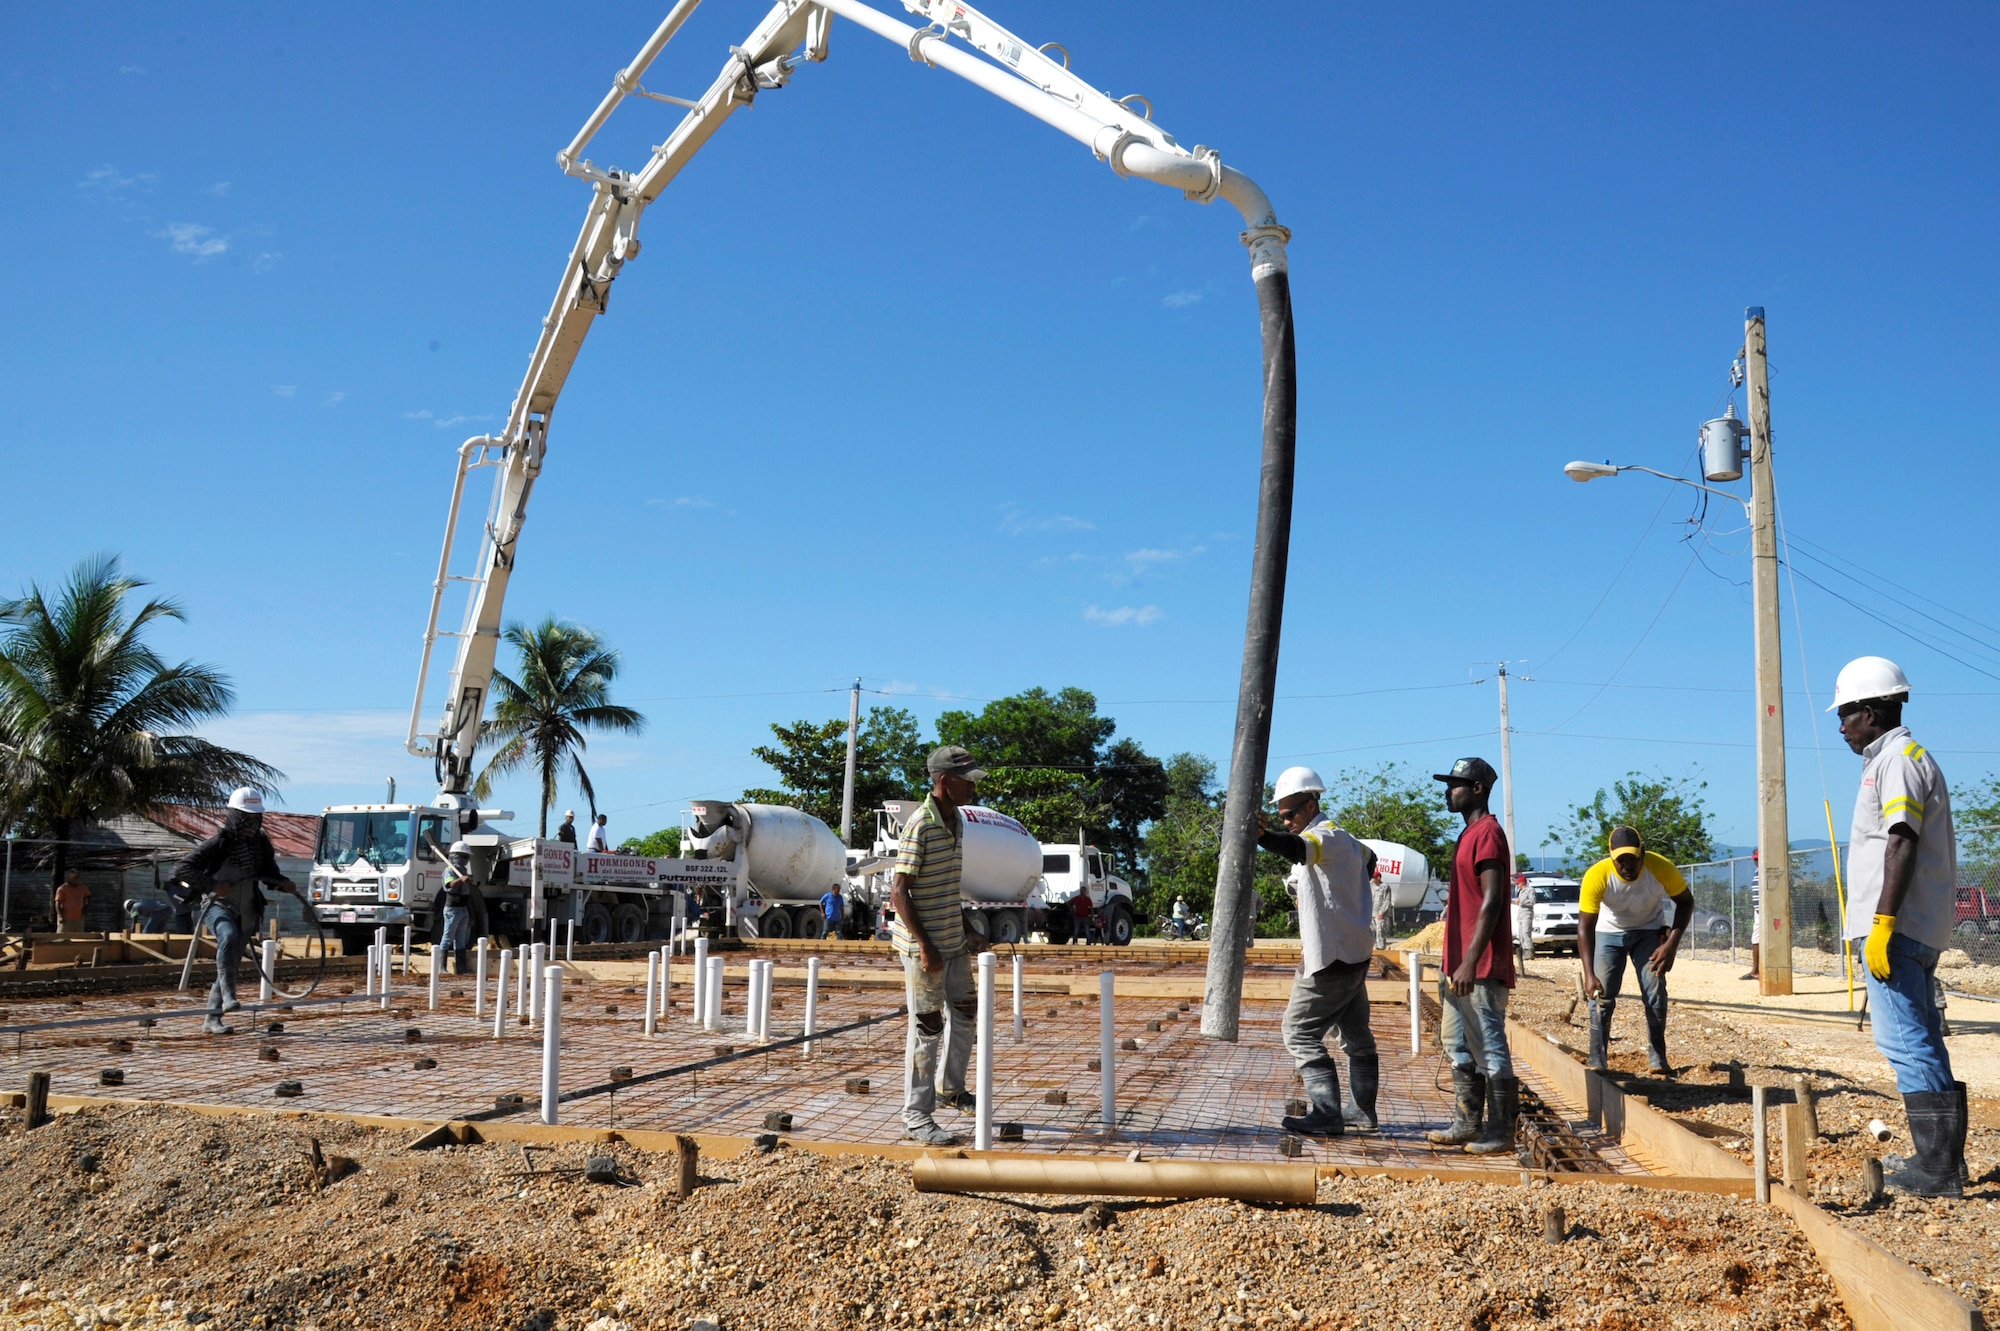 Dominican contractors fill a foundation with concrete for a clinic being built in Copeyito, Dominican Republic as part of Exercise NEW HORIZONS 2016, Apr. 7, 2016. NEW HORIZONS provides essential training to U.S. forces and allows them to remain prepared for real-world deployments in support of contingency, humanitarian assistance and disaster relief operations. (U.S. Air Force photo by Master Sgt. Chenzira Mallory/Released)